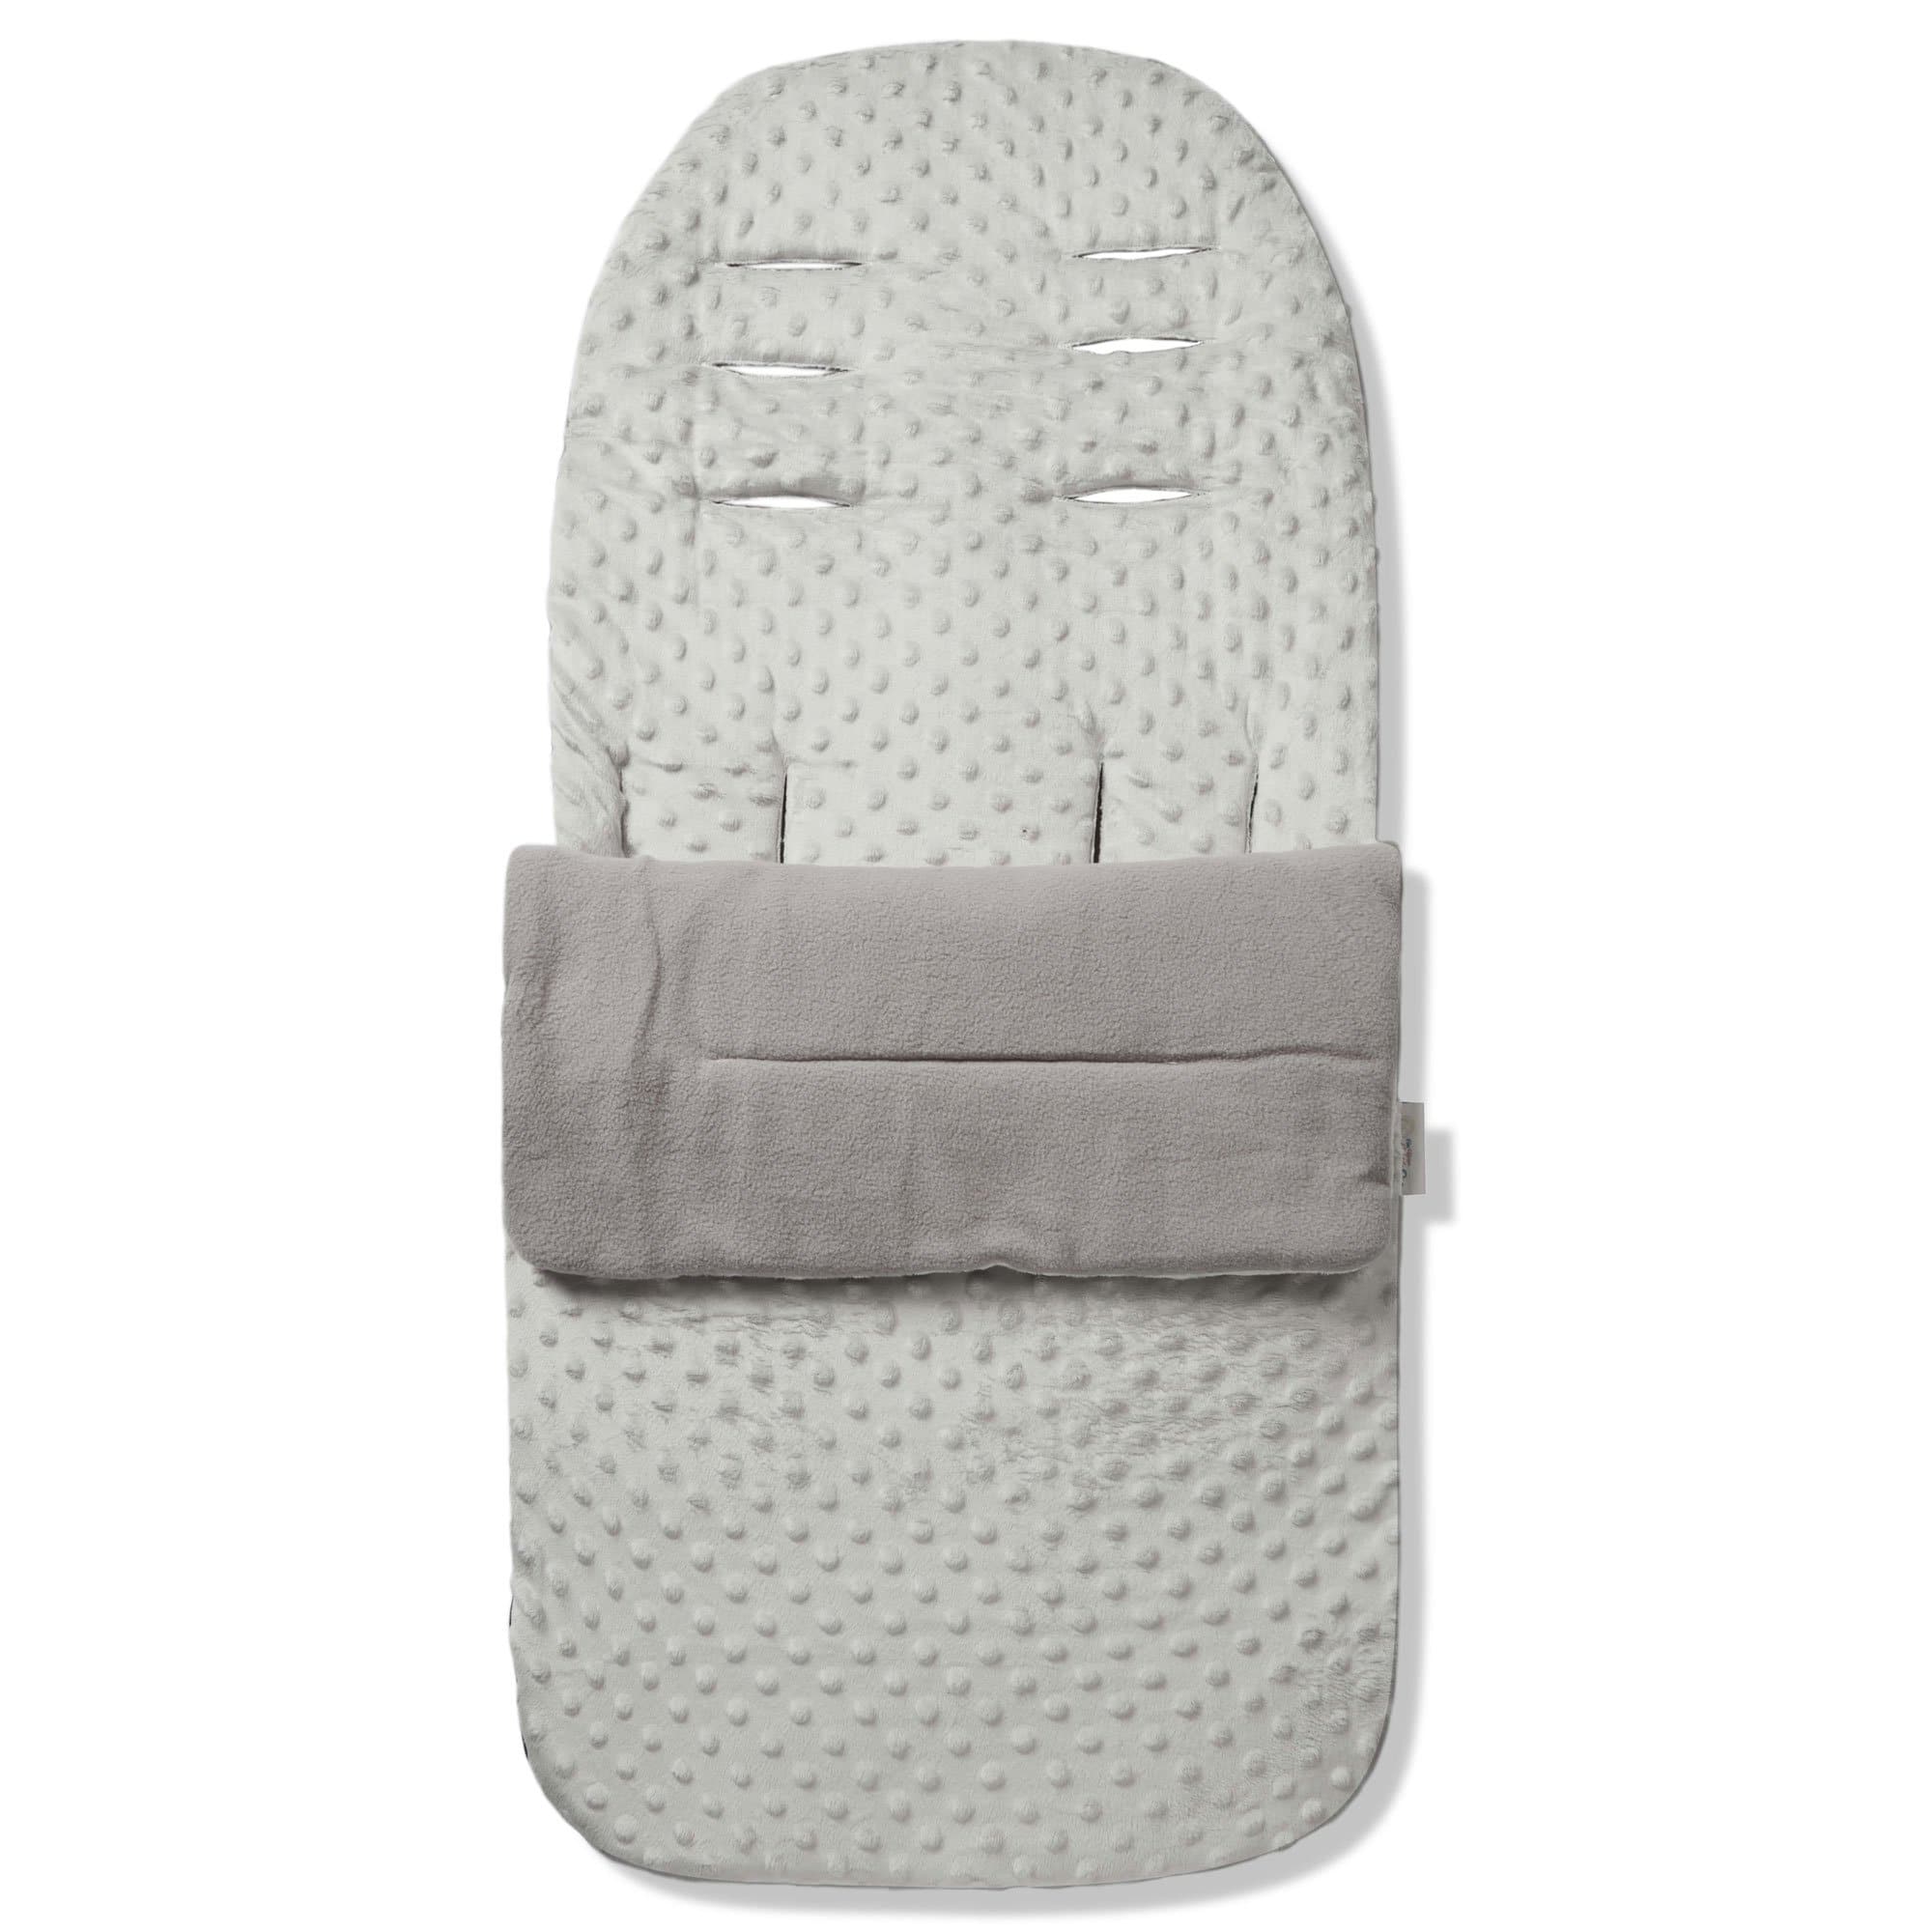 Dimple Footmuff / Cosy Toes Compatible with Baby Jogger - Grey / Fits All Models | For Your Little One